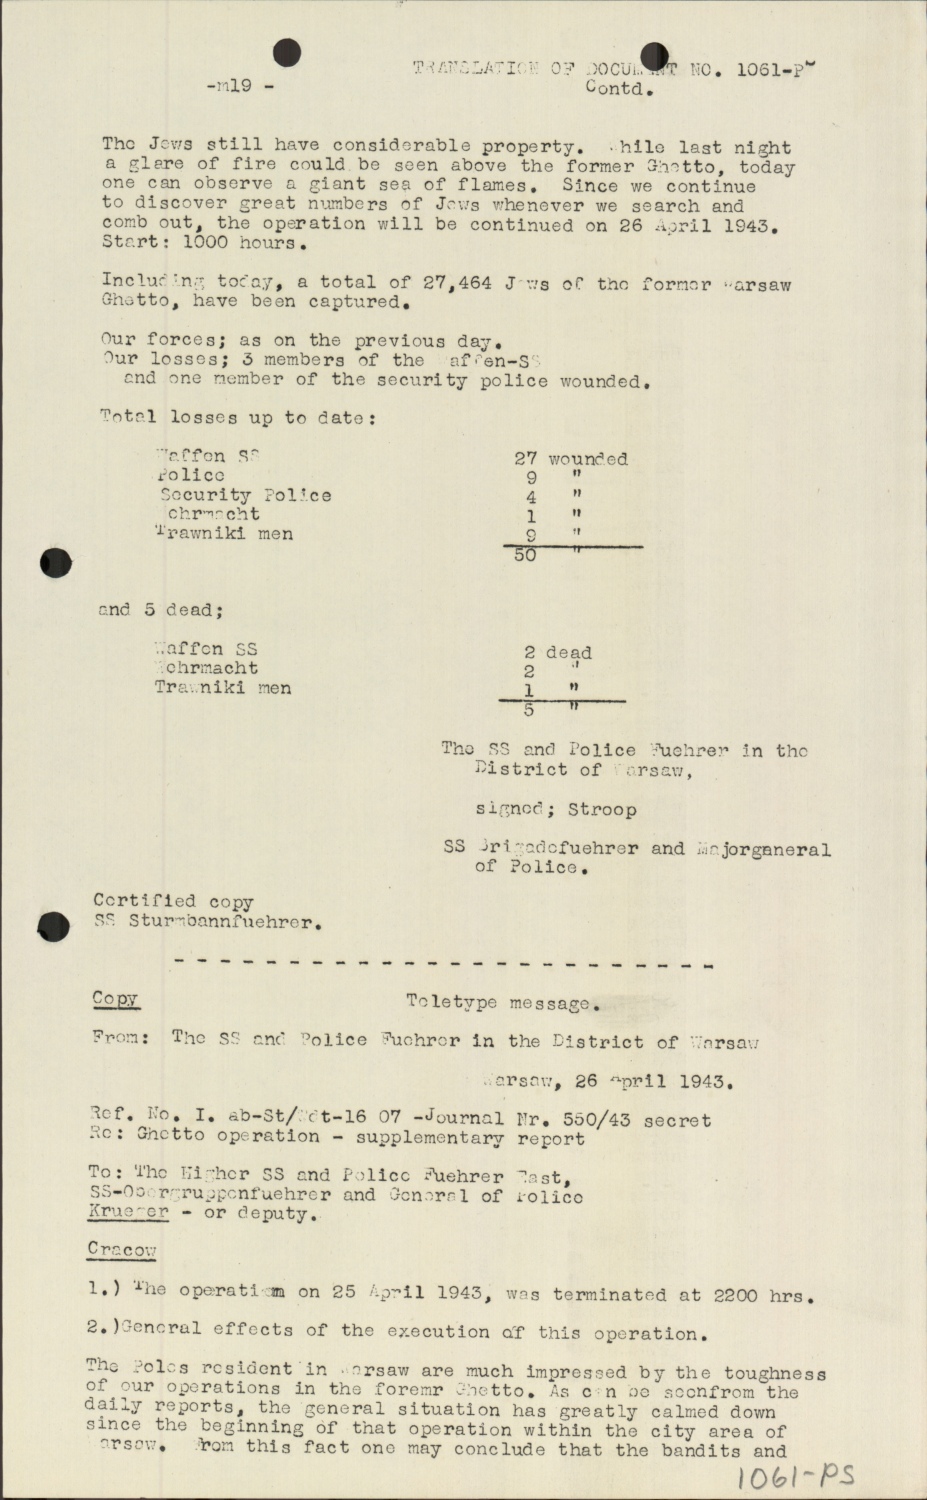 Scanned document page 19